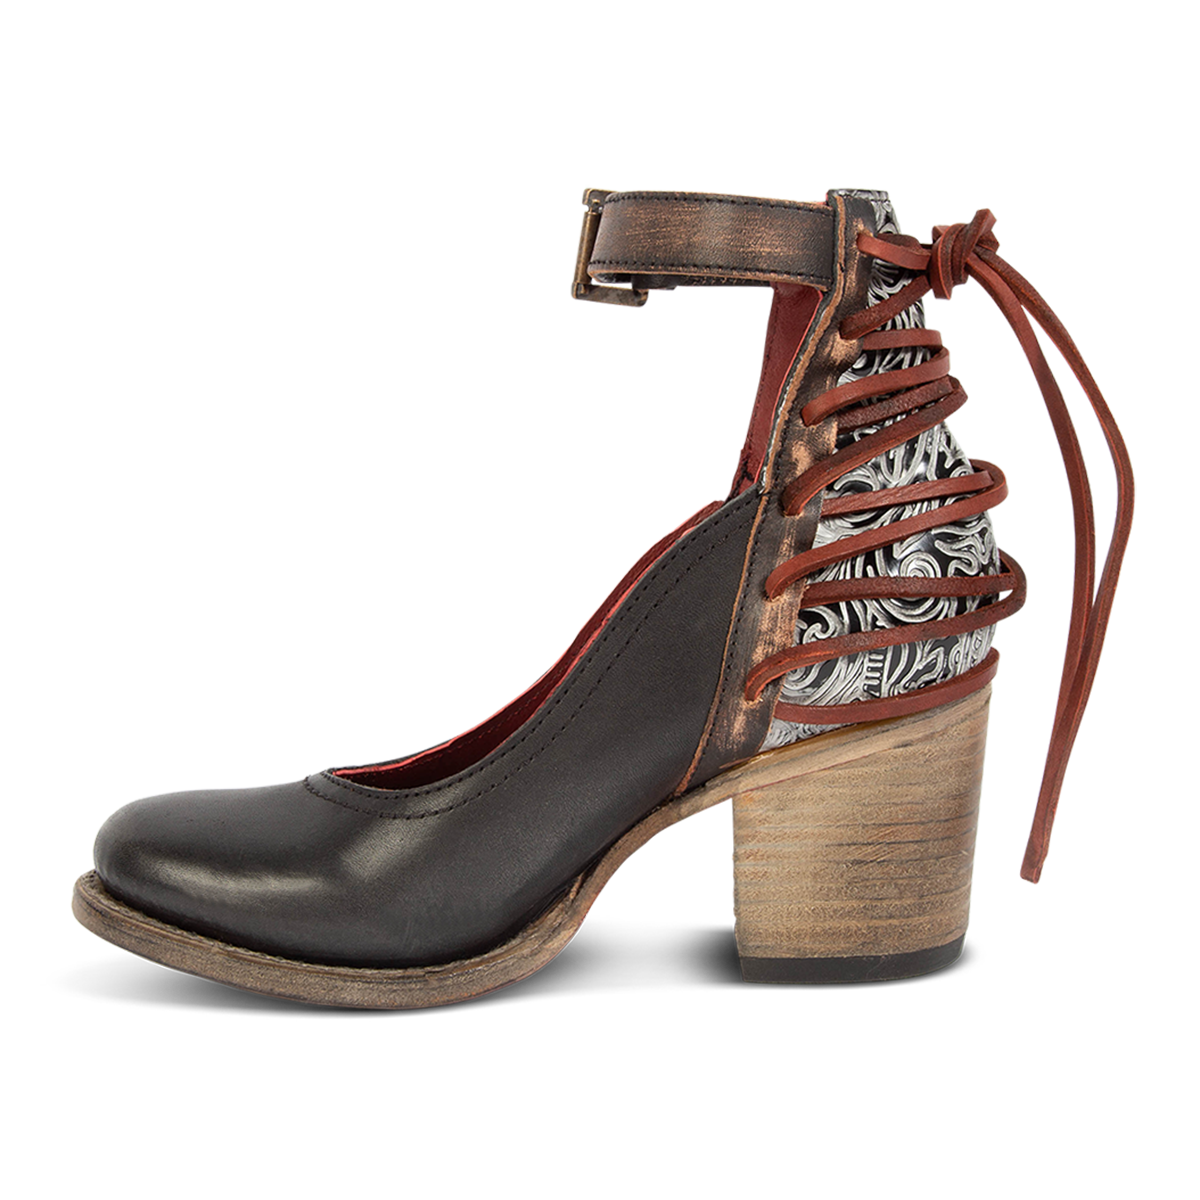 Inside view showing wood wrapped heel with adjustable leather ankle strap on FREEBIRD women's Raeanne black multi shoe